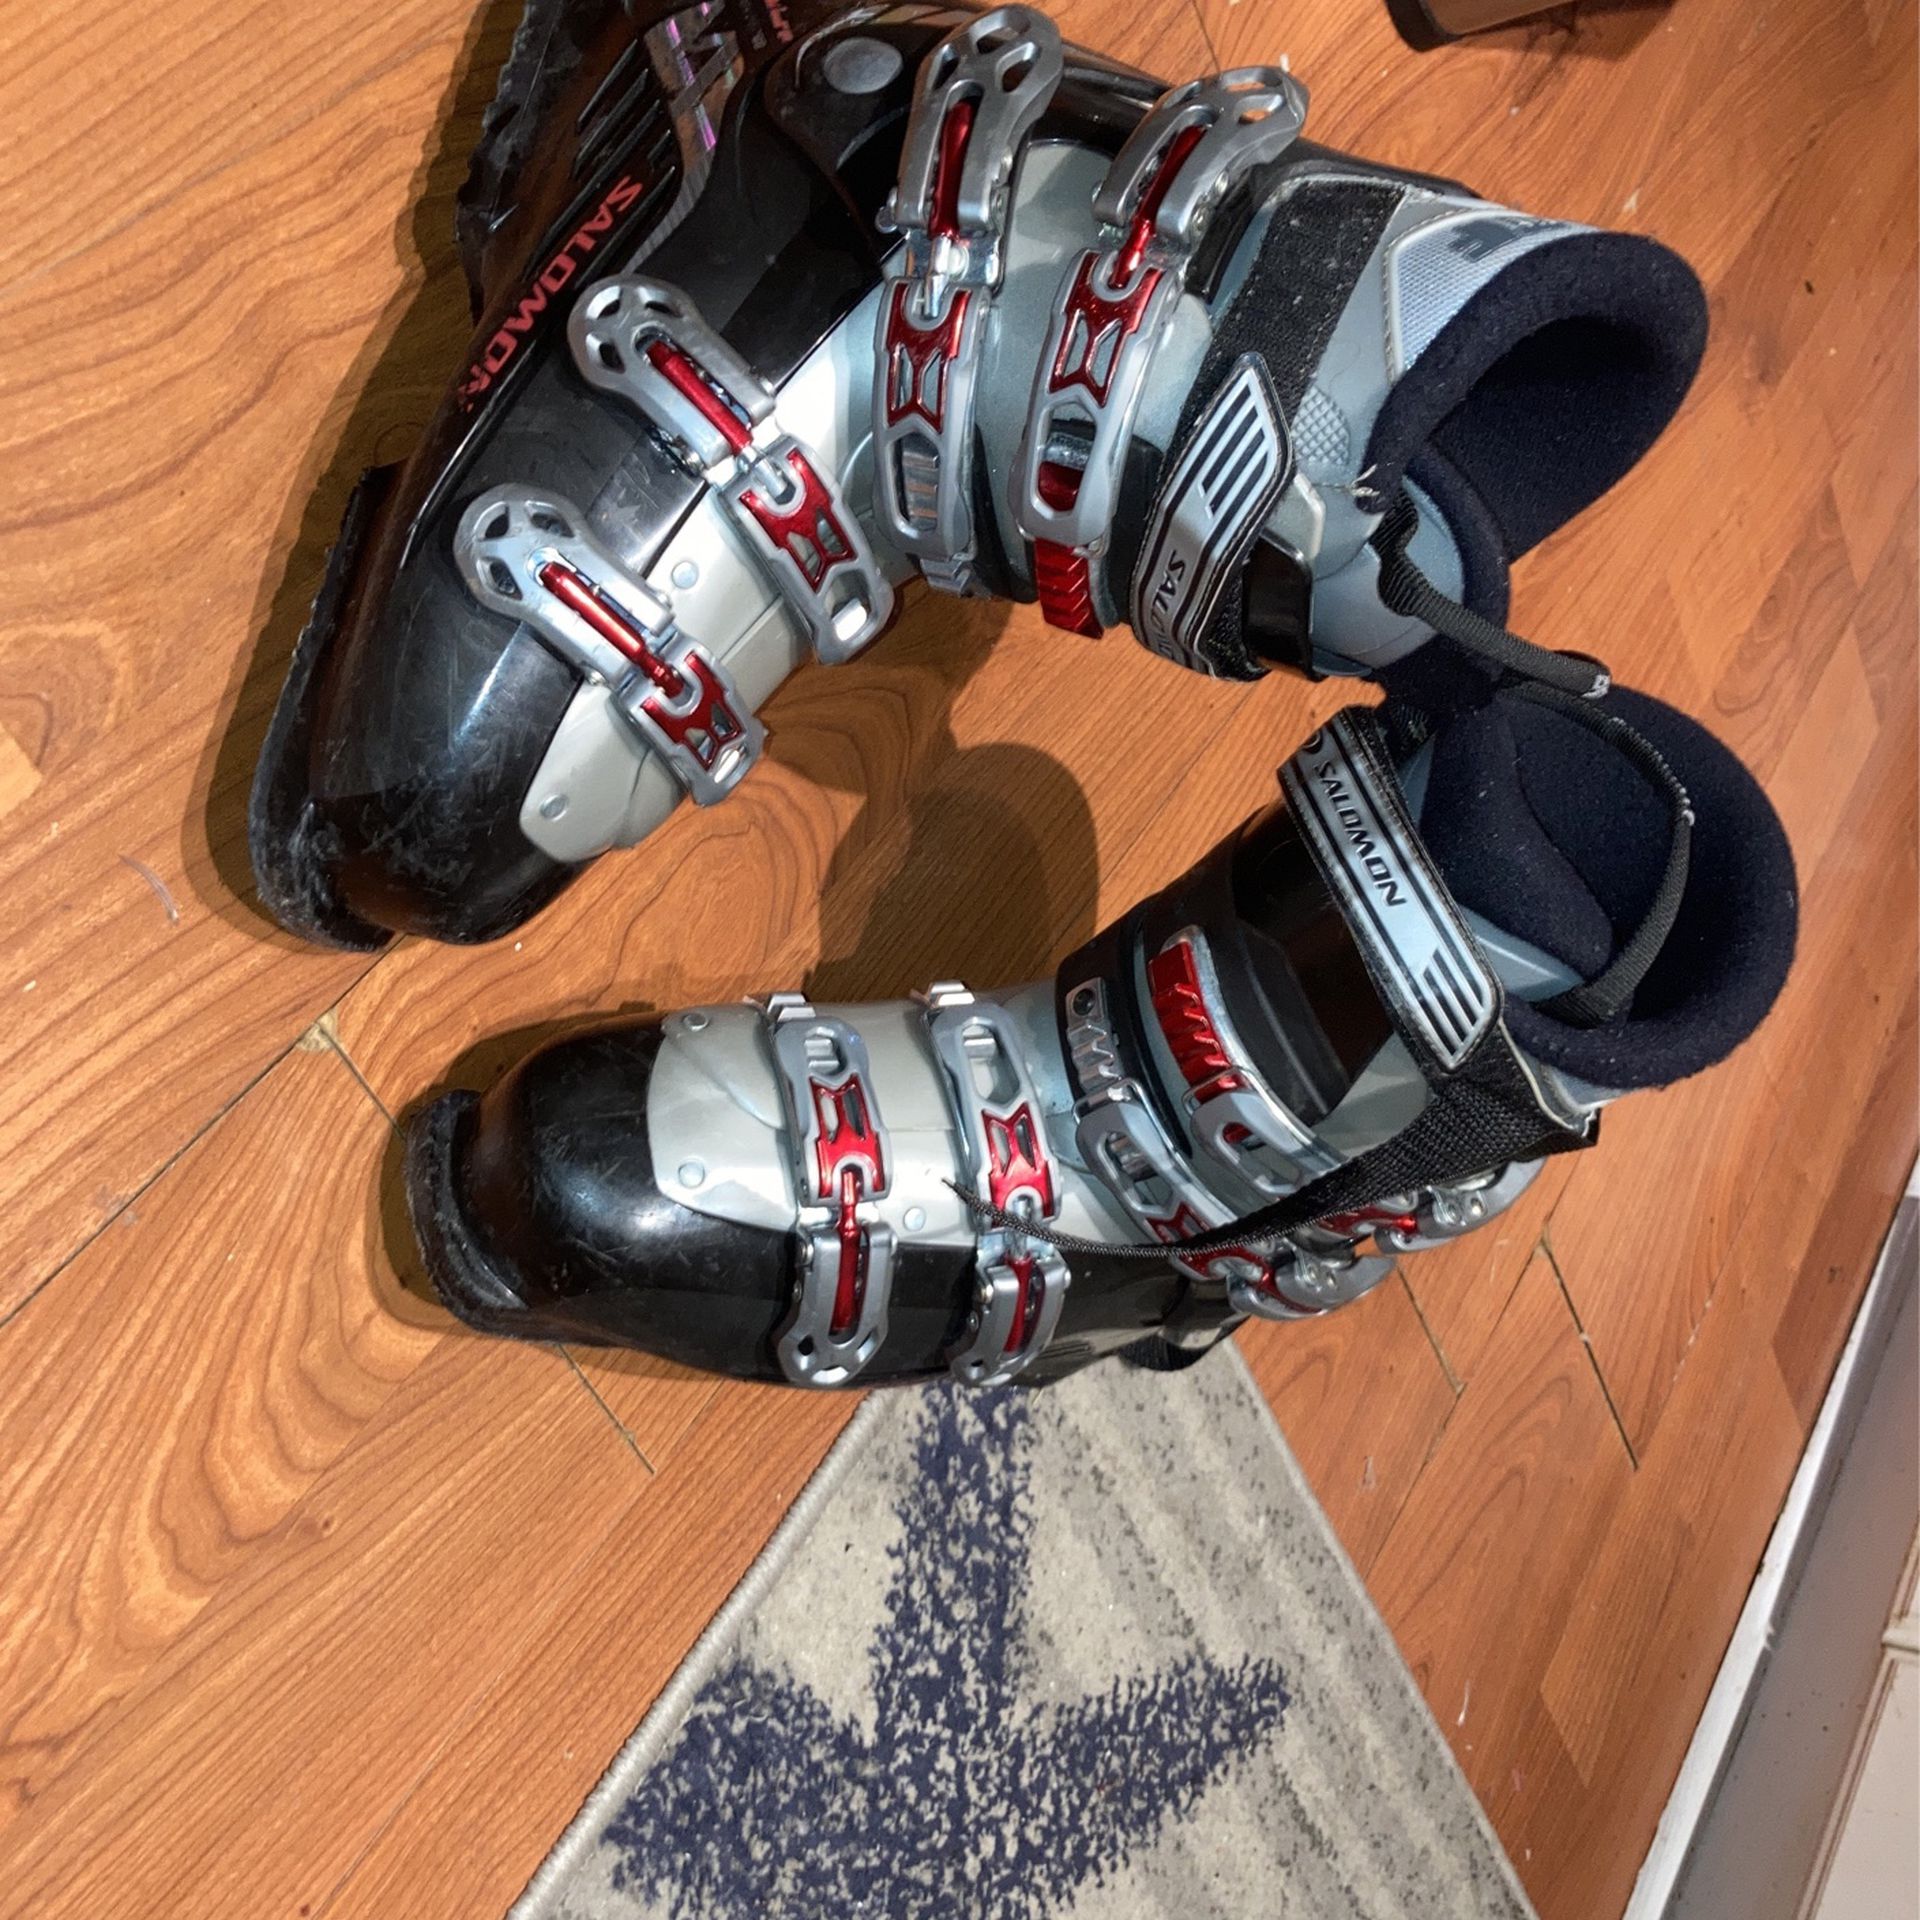 .Solomon ski boots size 26 good condition scratches on the outside obviously great food to start off